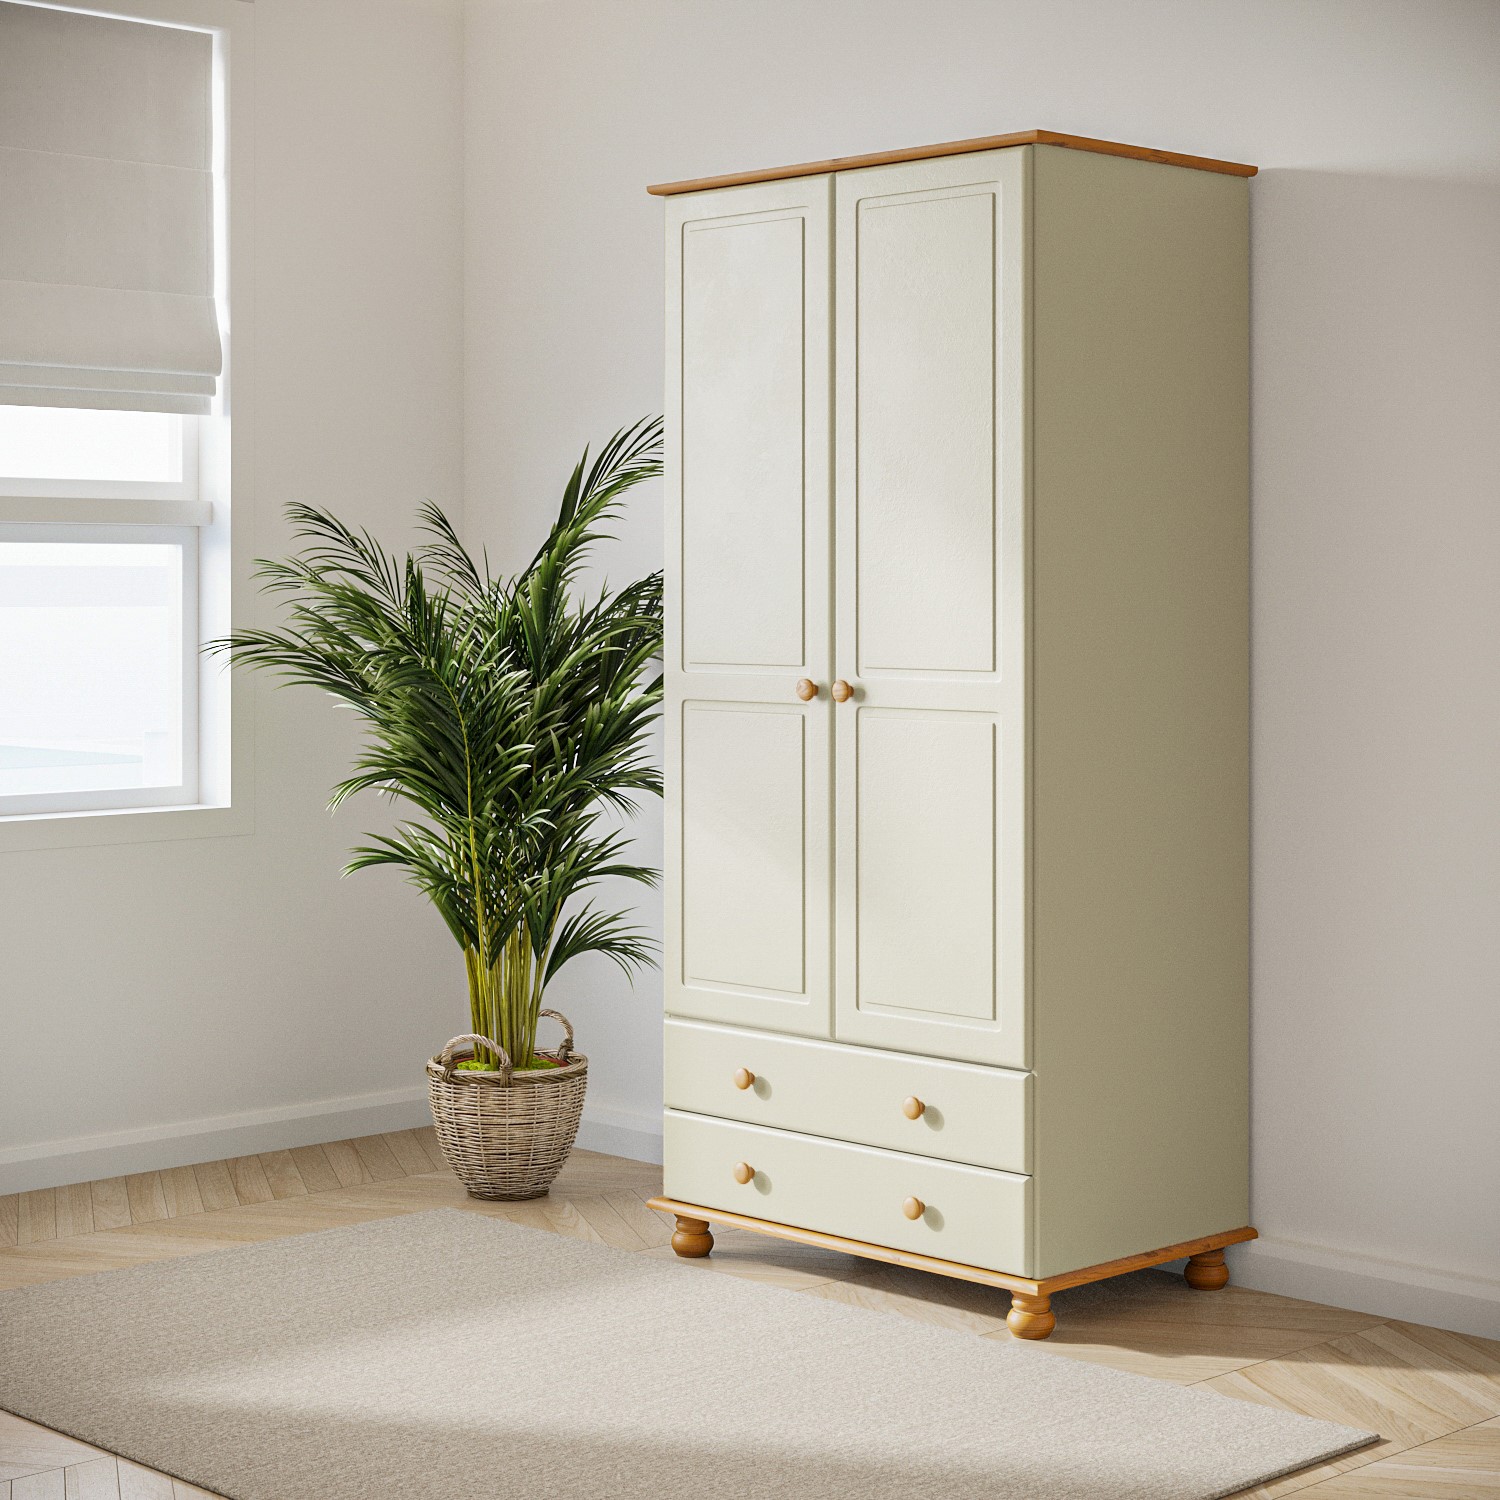 Photo of Cream and pine painted 2 door double wardrobe with drawers - hamilton